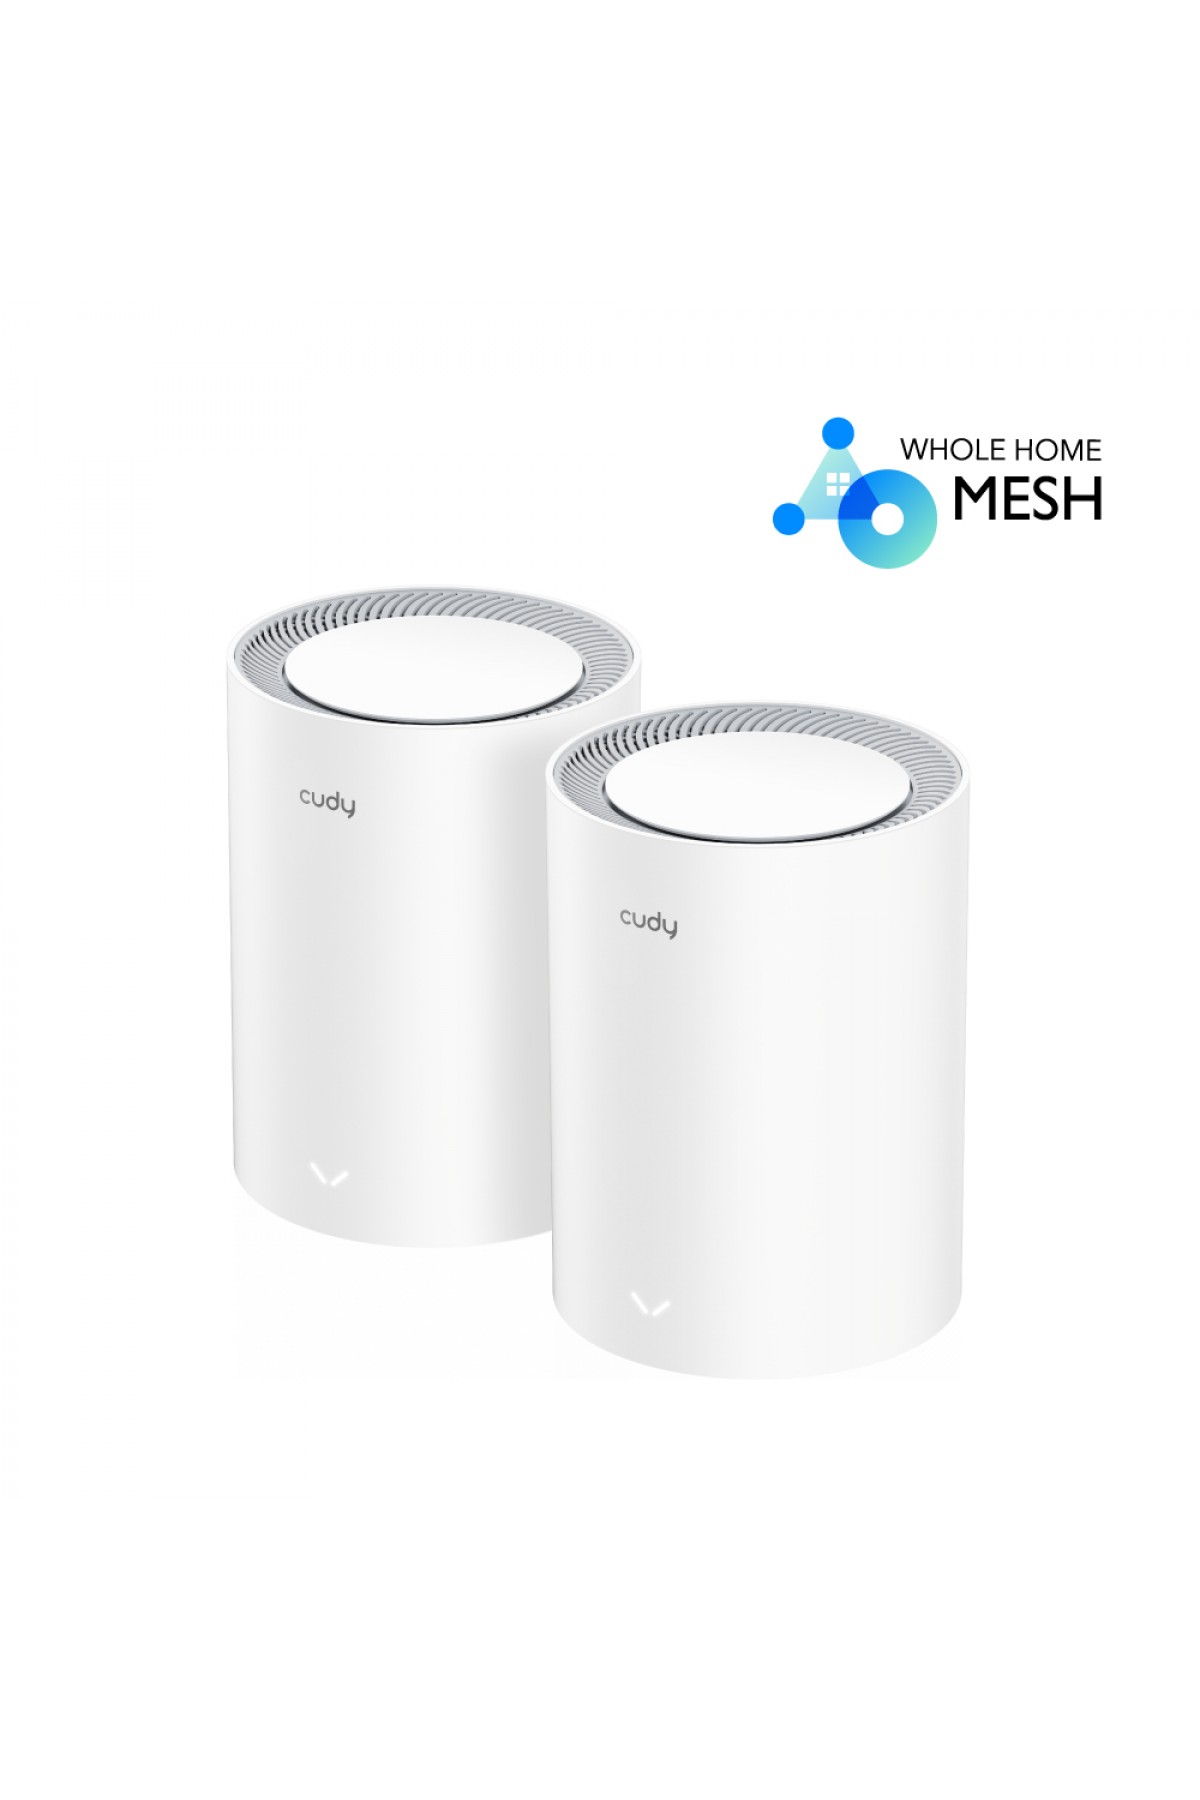 AX1800 Whole Home Mesh WiFi System, Model: M1800 2-Pack